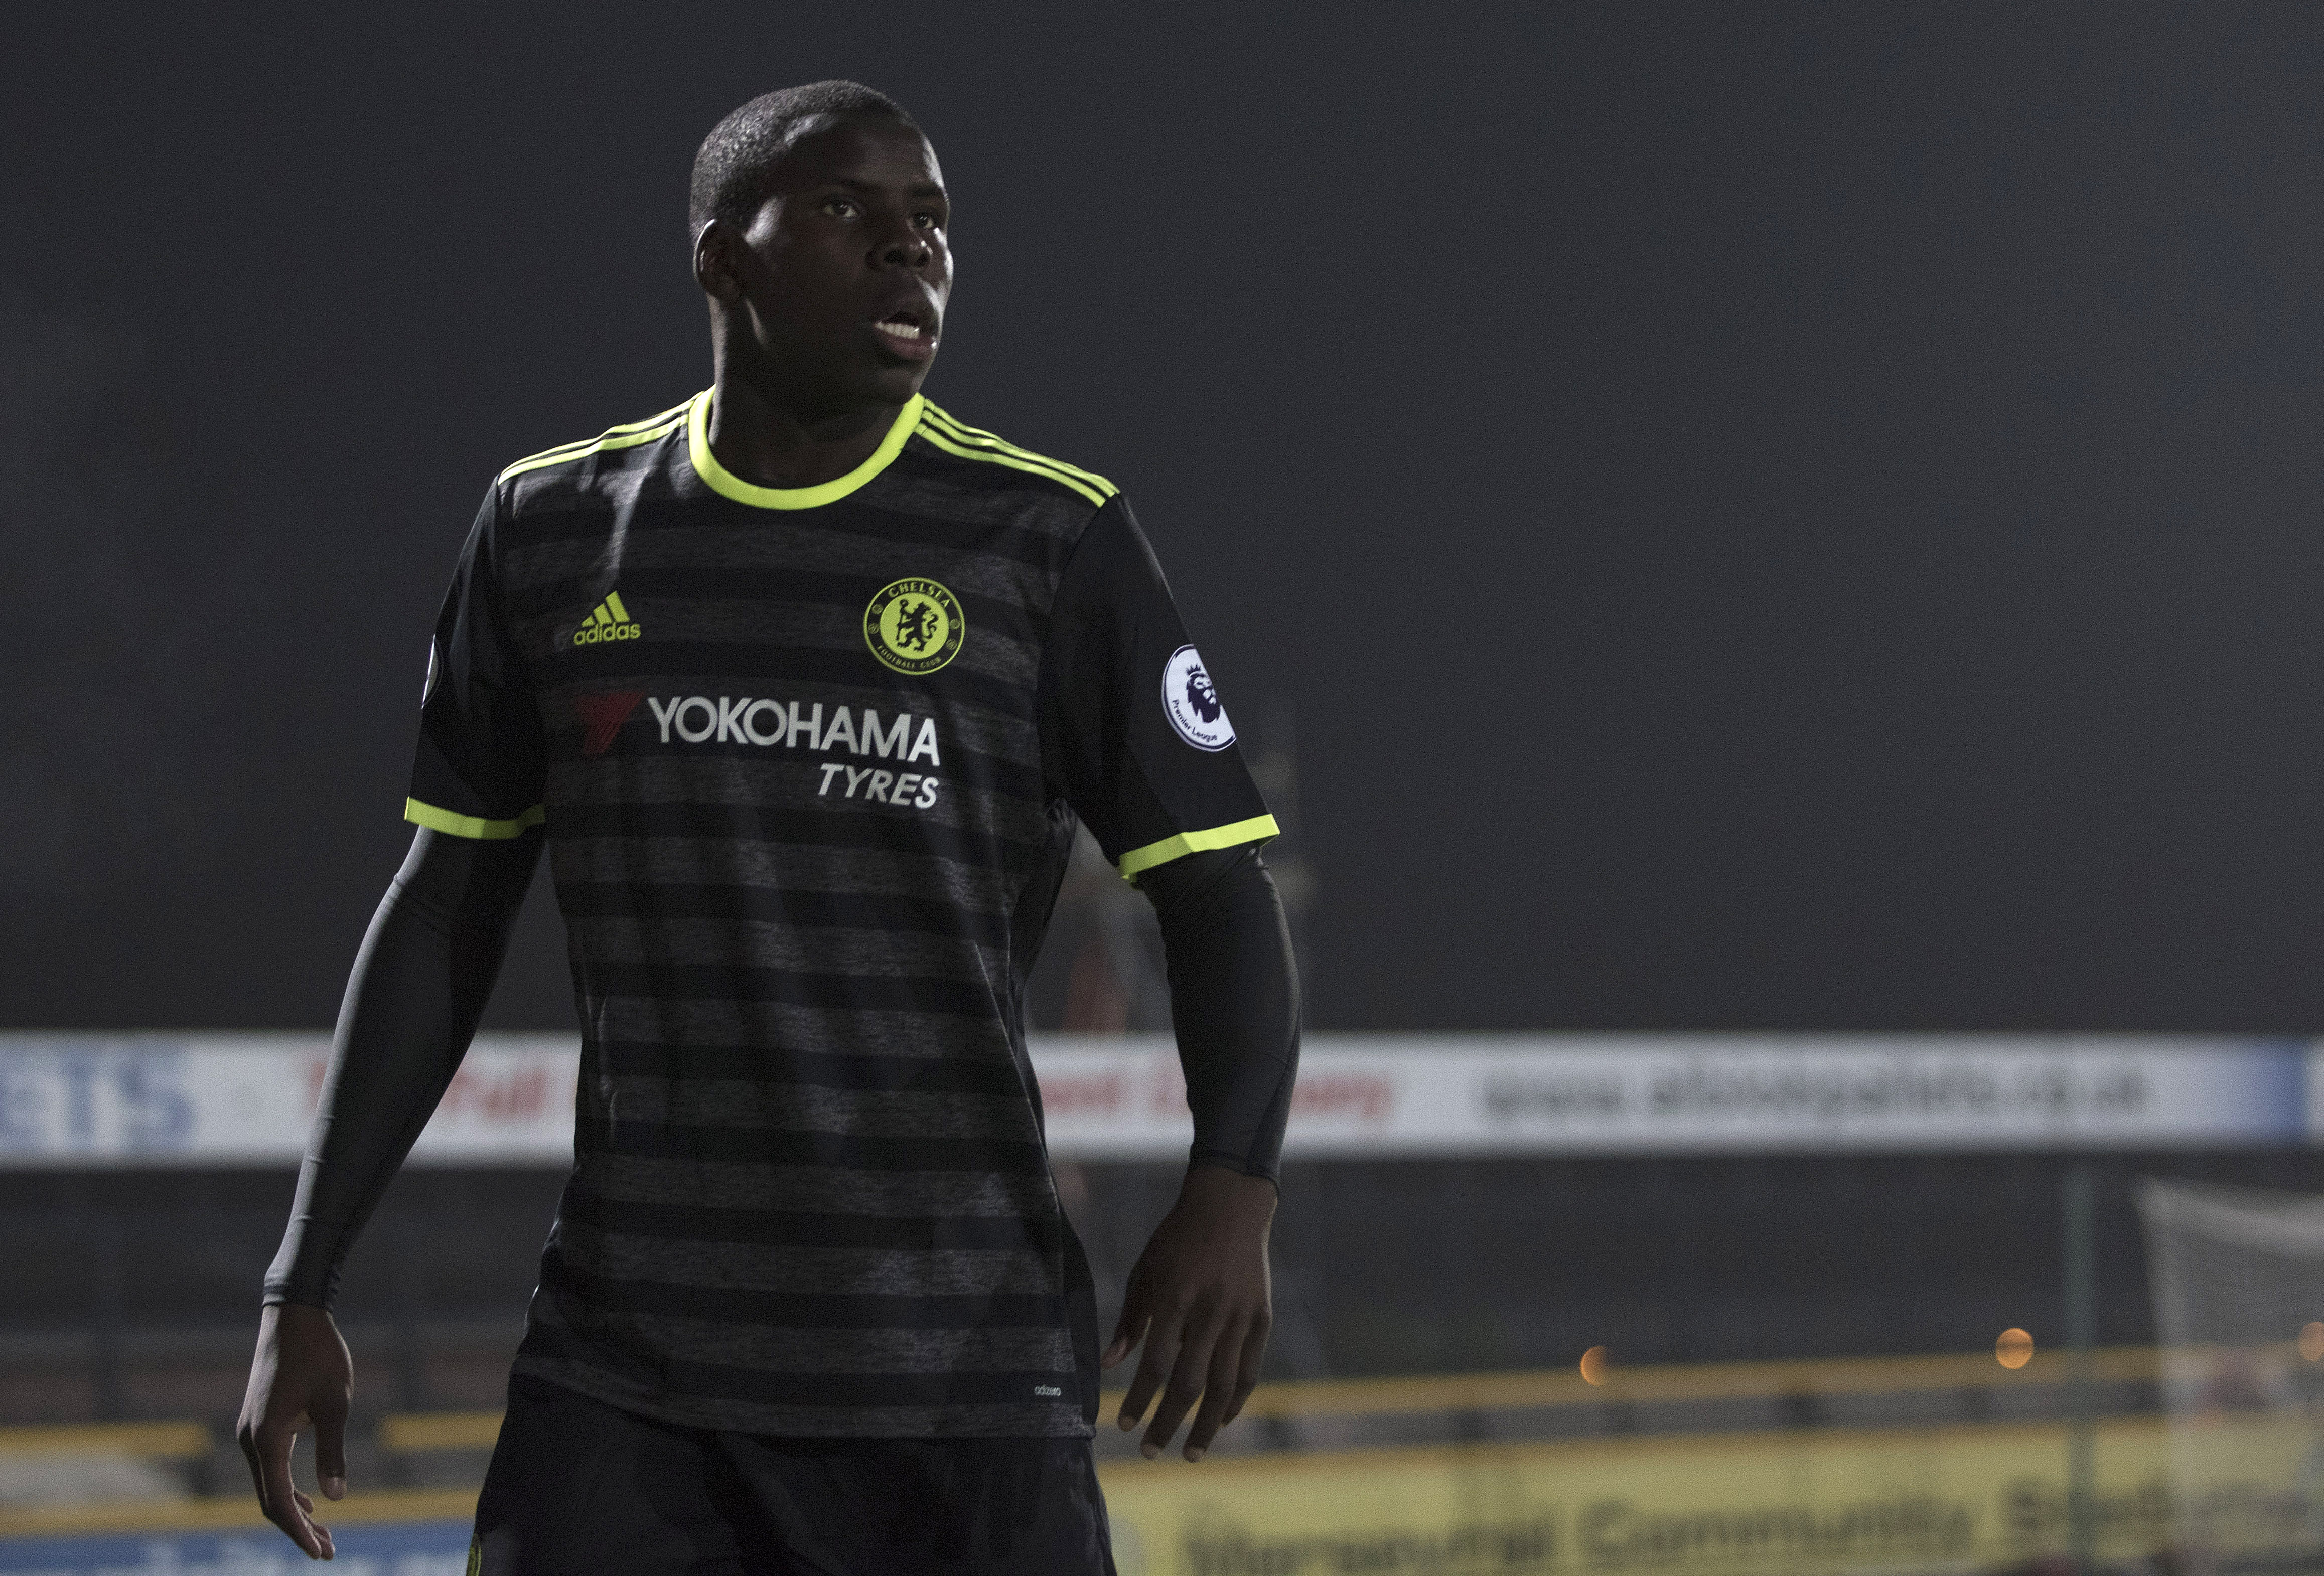 SOUTHPORT, ENGLAND- October 31: Kurt Zouma of Chelsea looks on during the Premier League 2 match between Everton U21s and Chelsea U21s at Haig Avenue Stadium on October 31, 2016 in Southport, England. (Photo by Nathan Stirk/Getty Images)